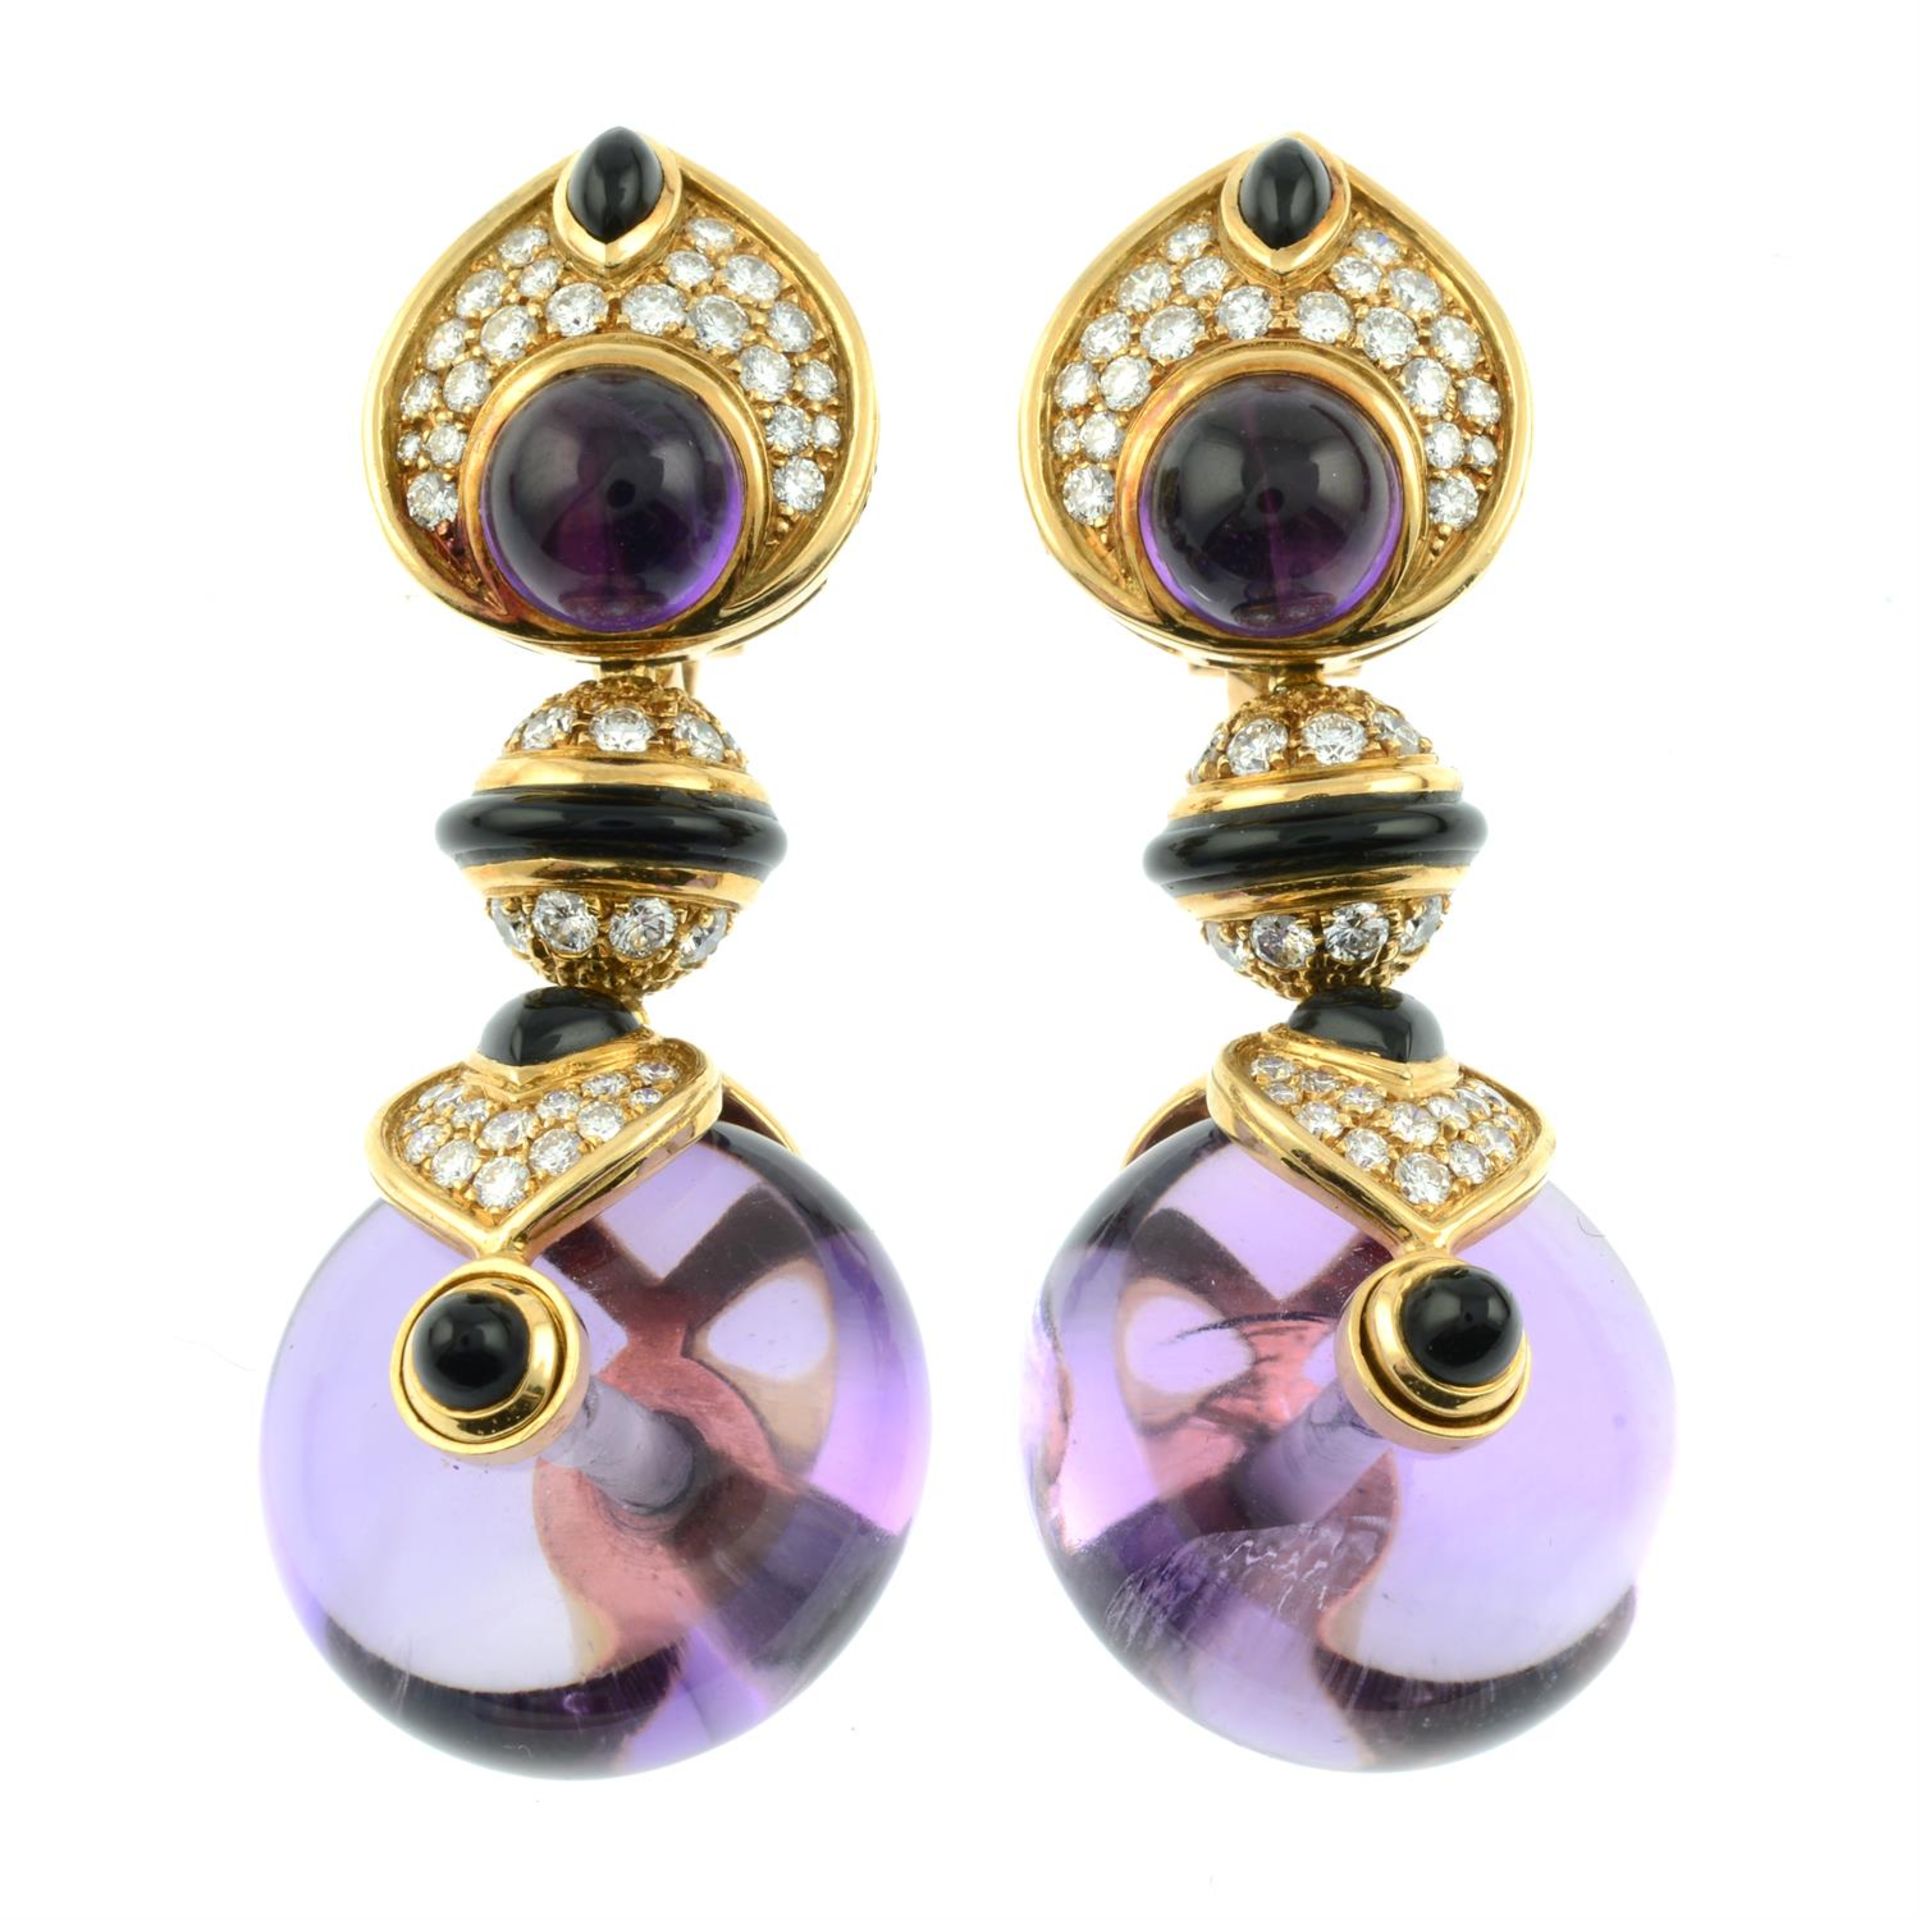 A pair of amethyst, onyx and pavé-set diamond earrings, by Marina B. - Image 2 of 3